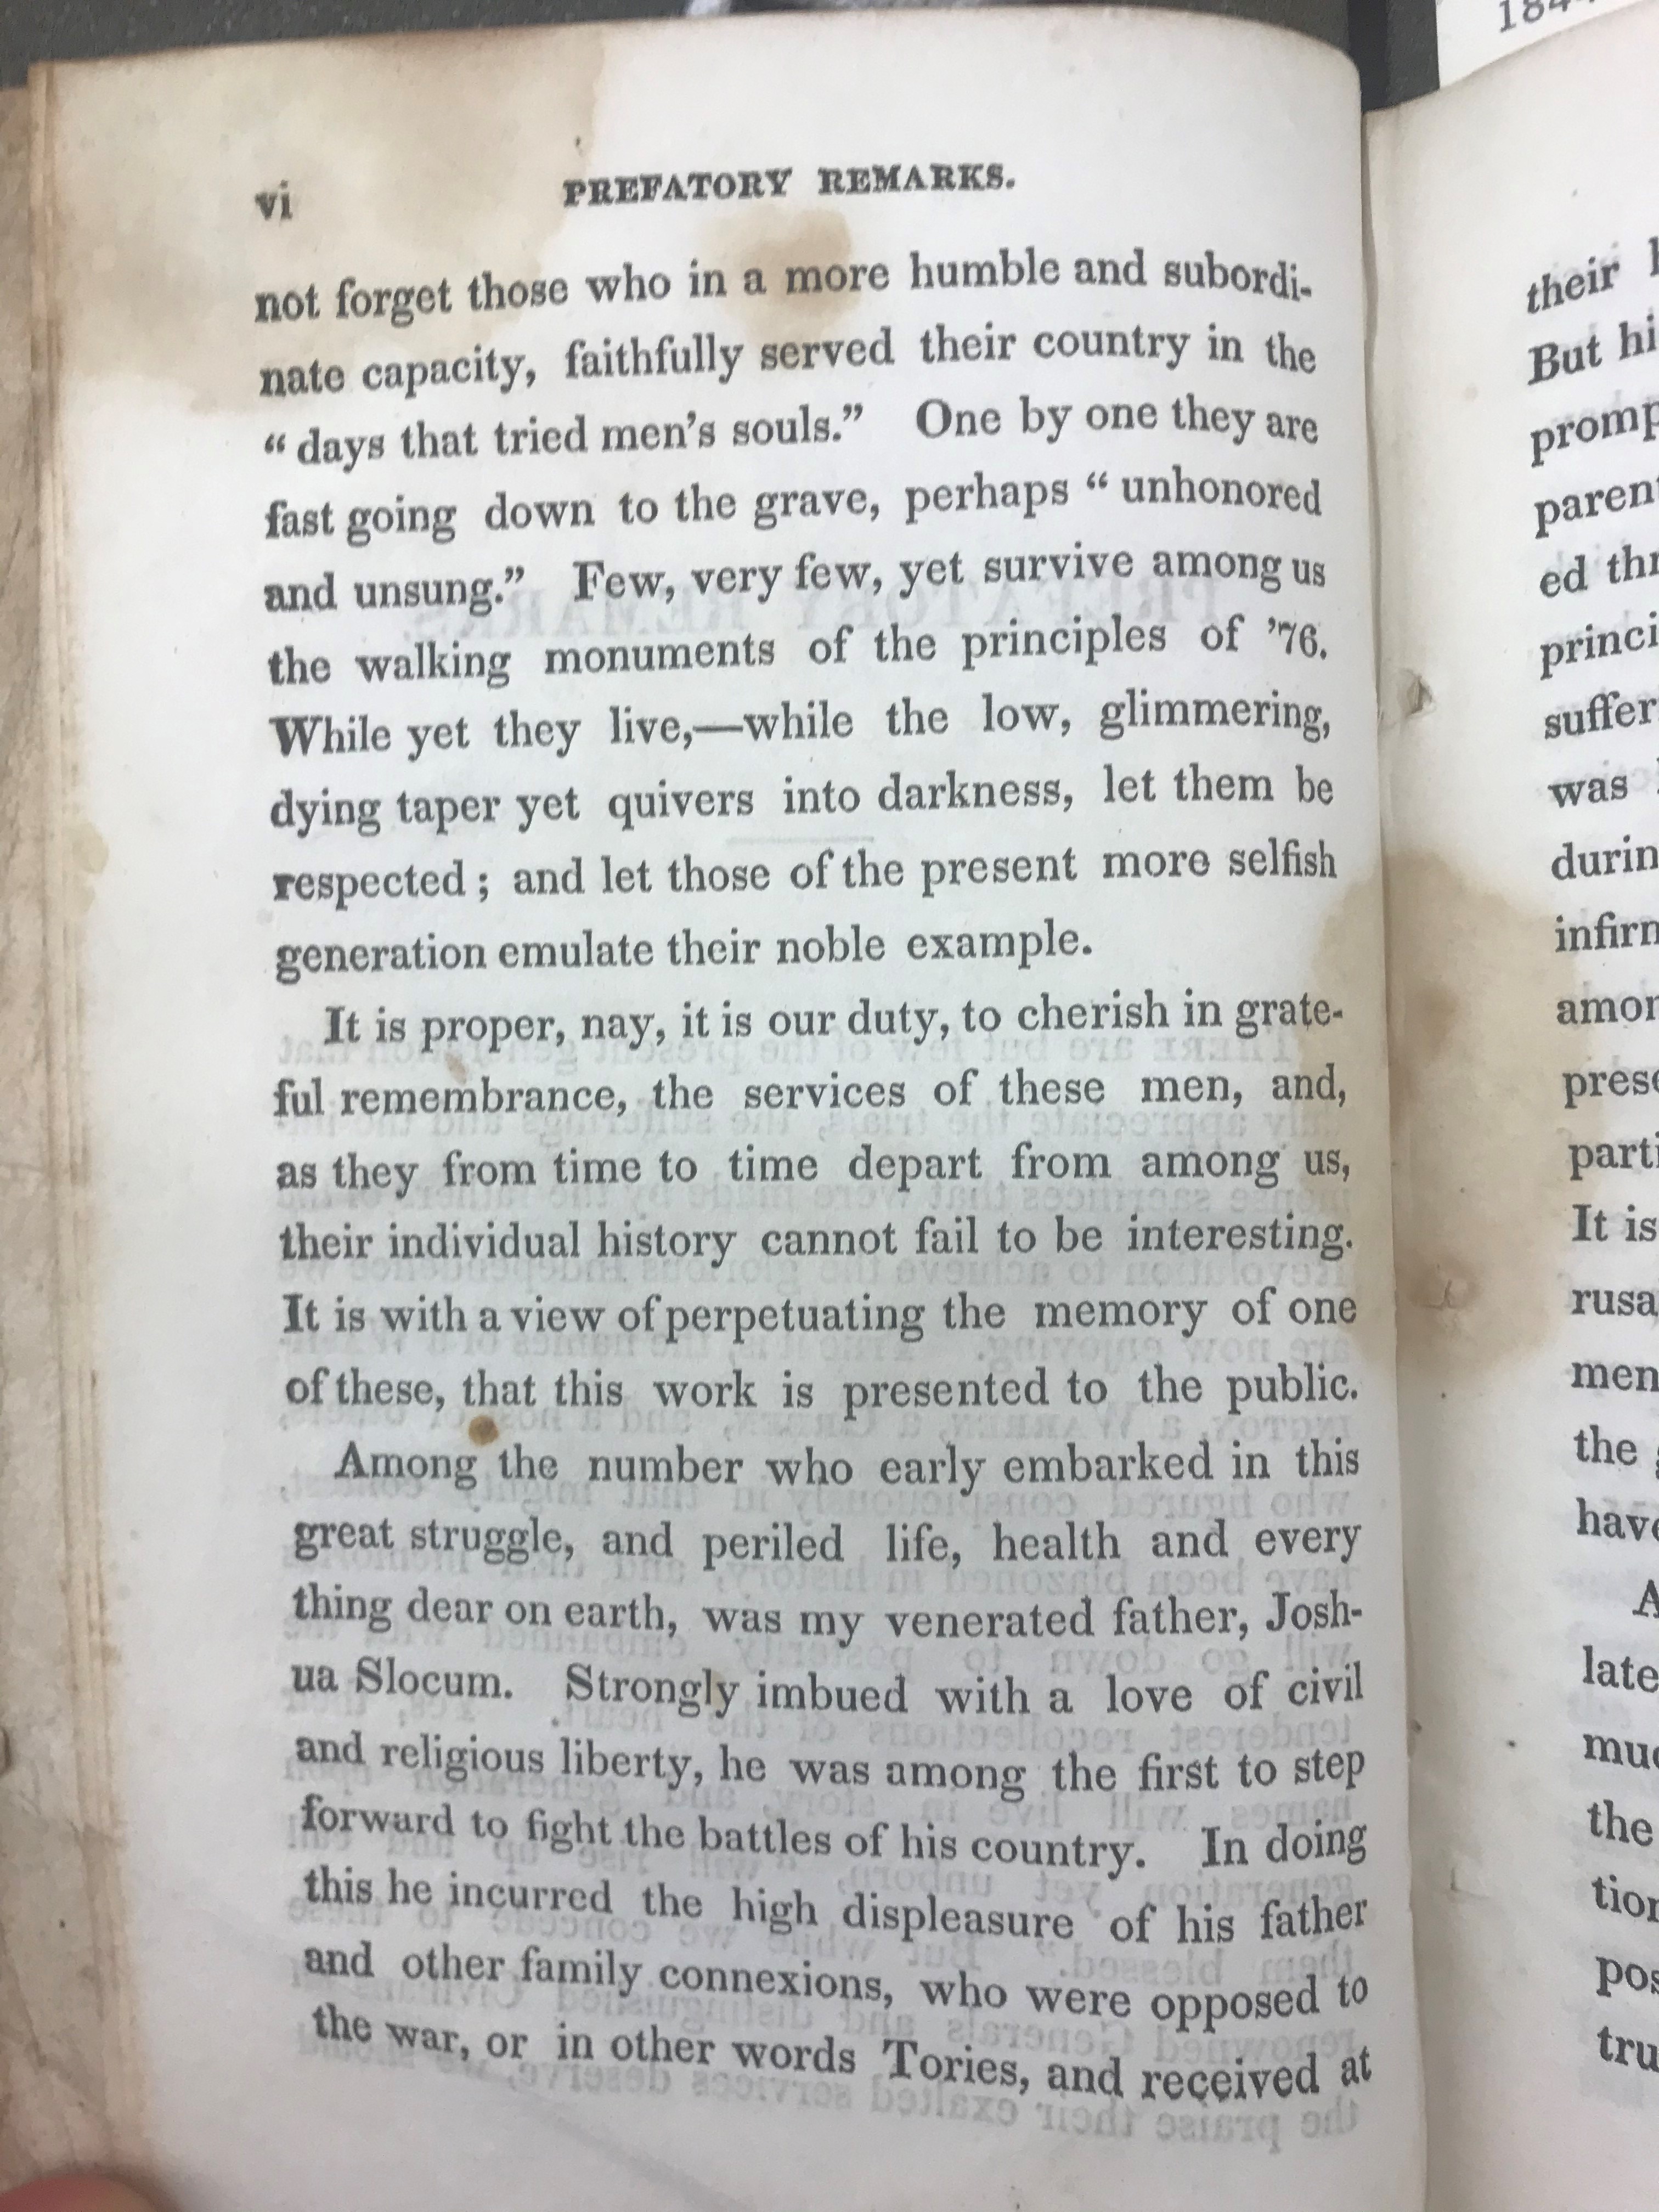 An Authentic Narrative of the Life of Joshua Slocum, 1844